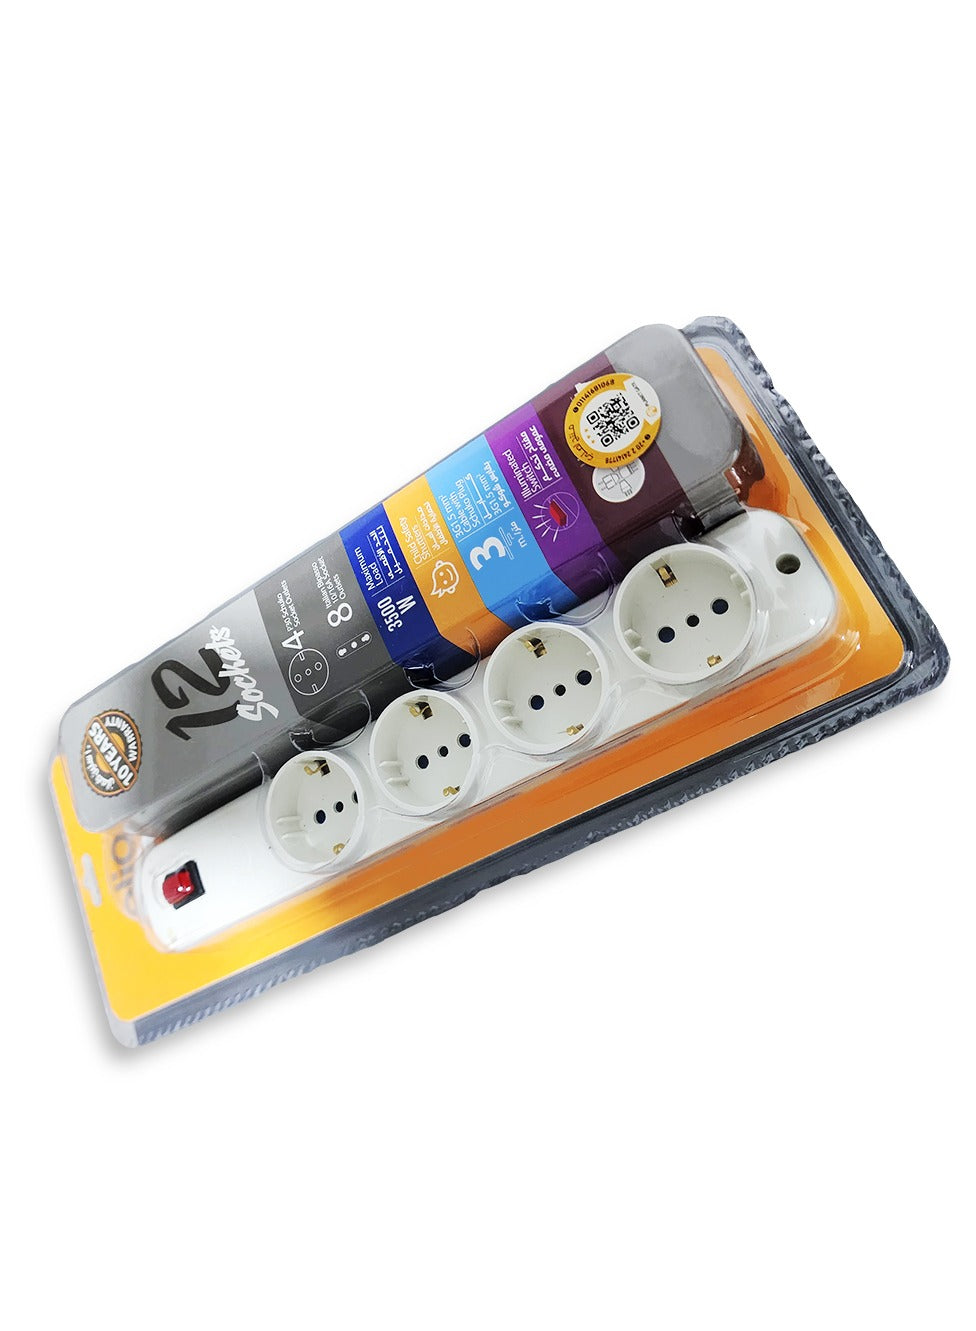 Elios Electric Power Outlets Sockets power strip with 12 outlets - White